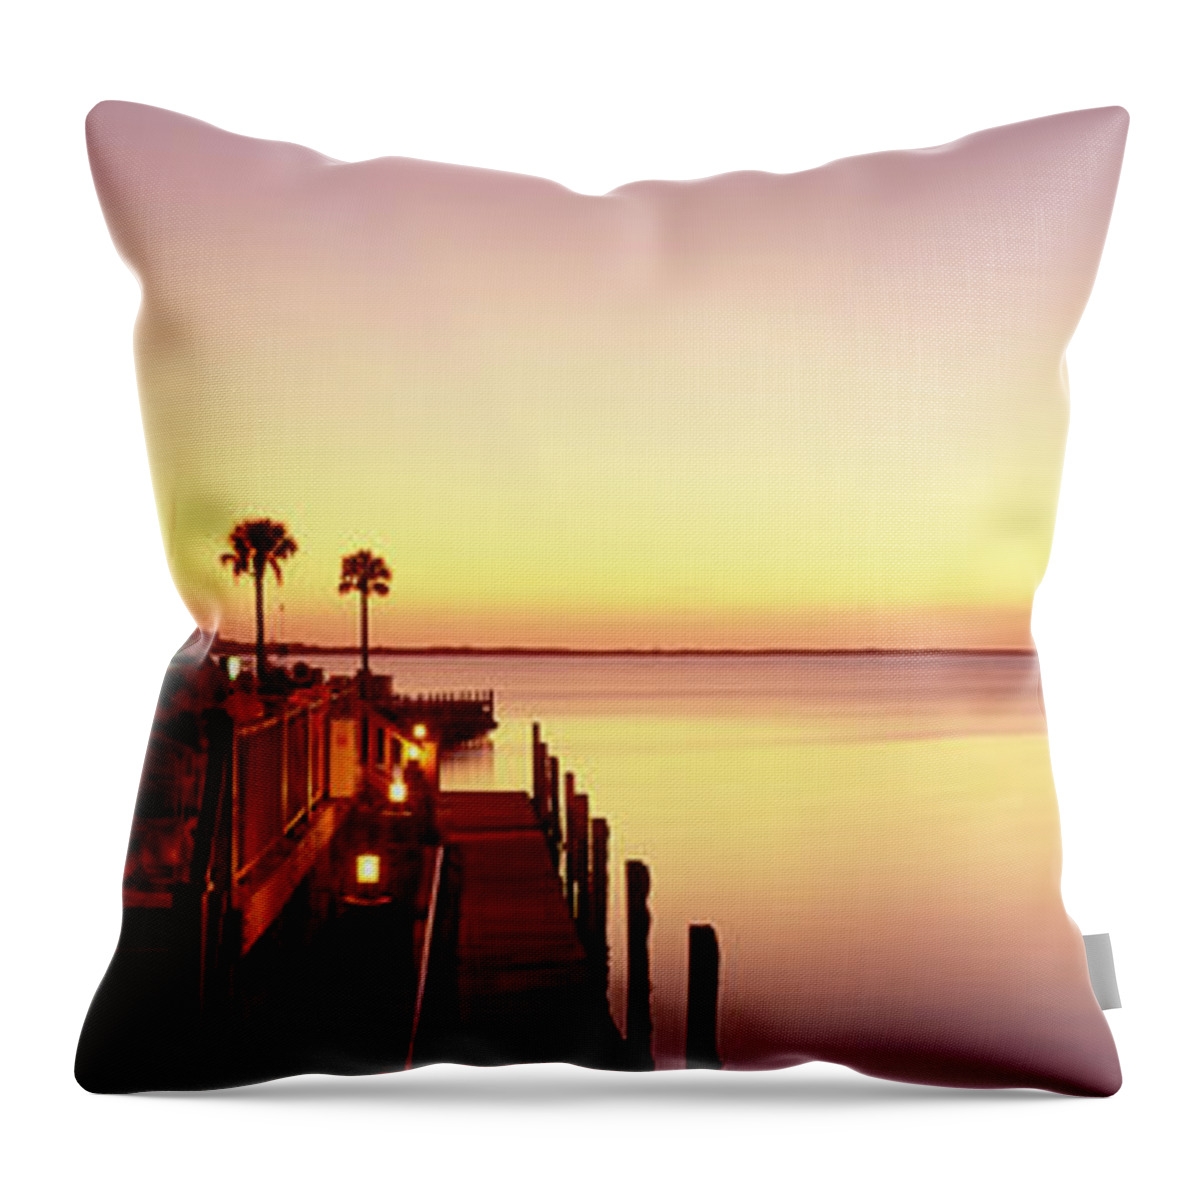 Photography Throw Pillow featuring the photograph Silhouette Of A Hotel By The Sea, Key by Panoramic Images